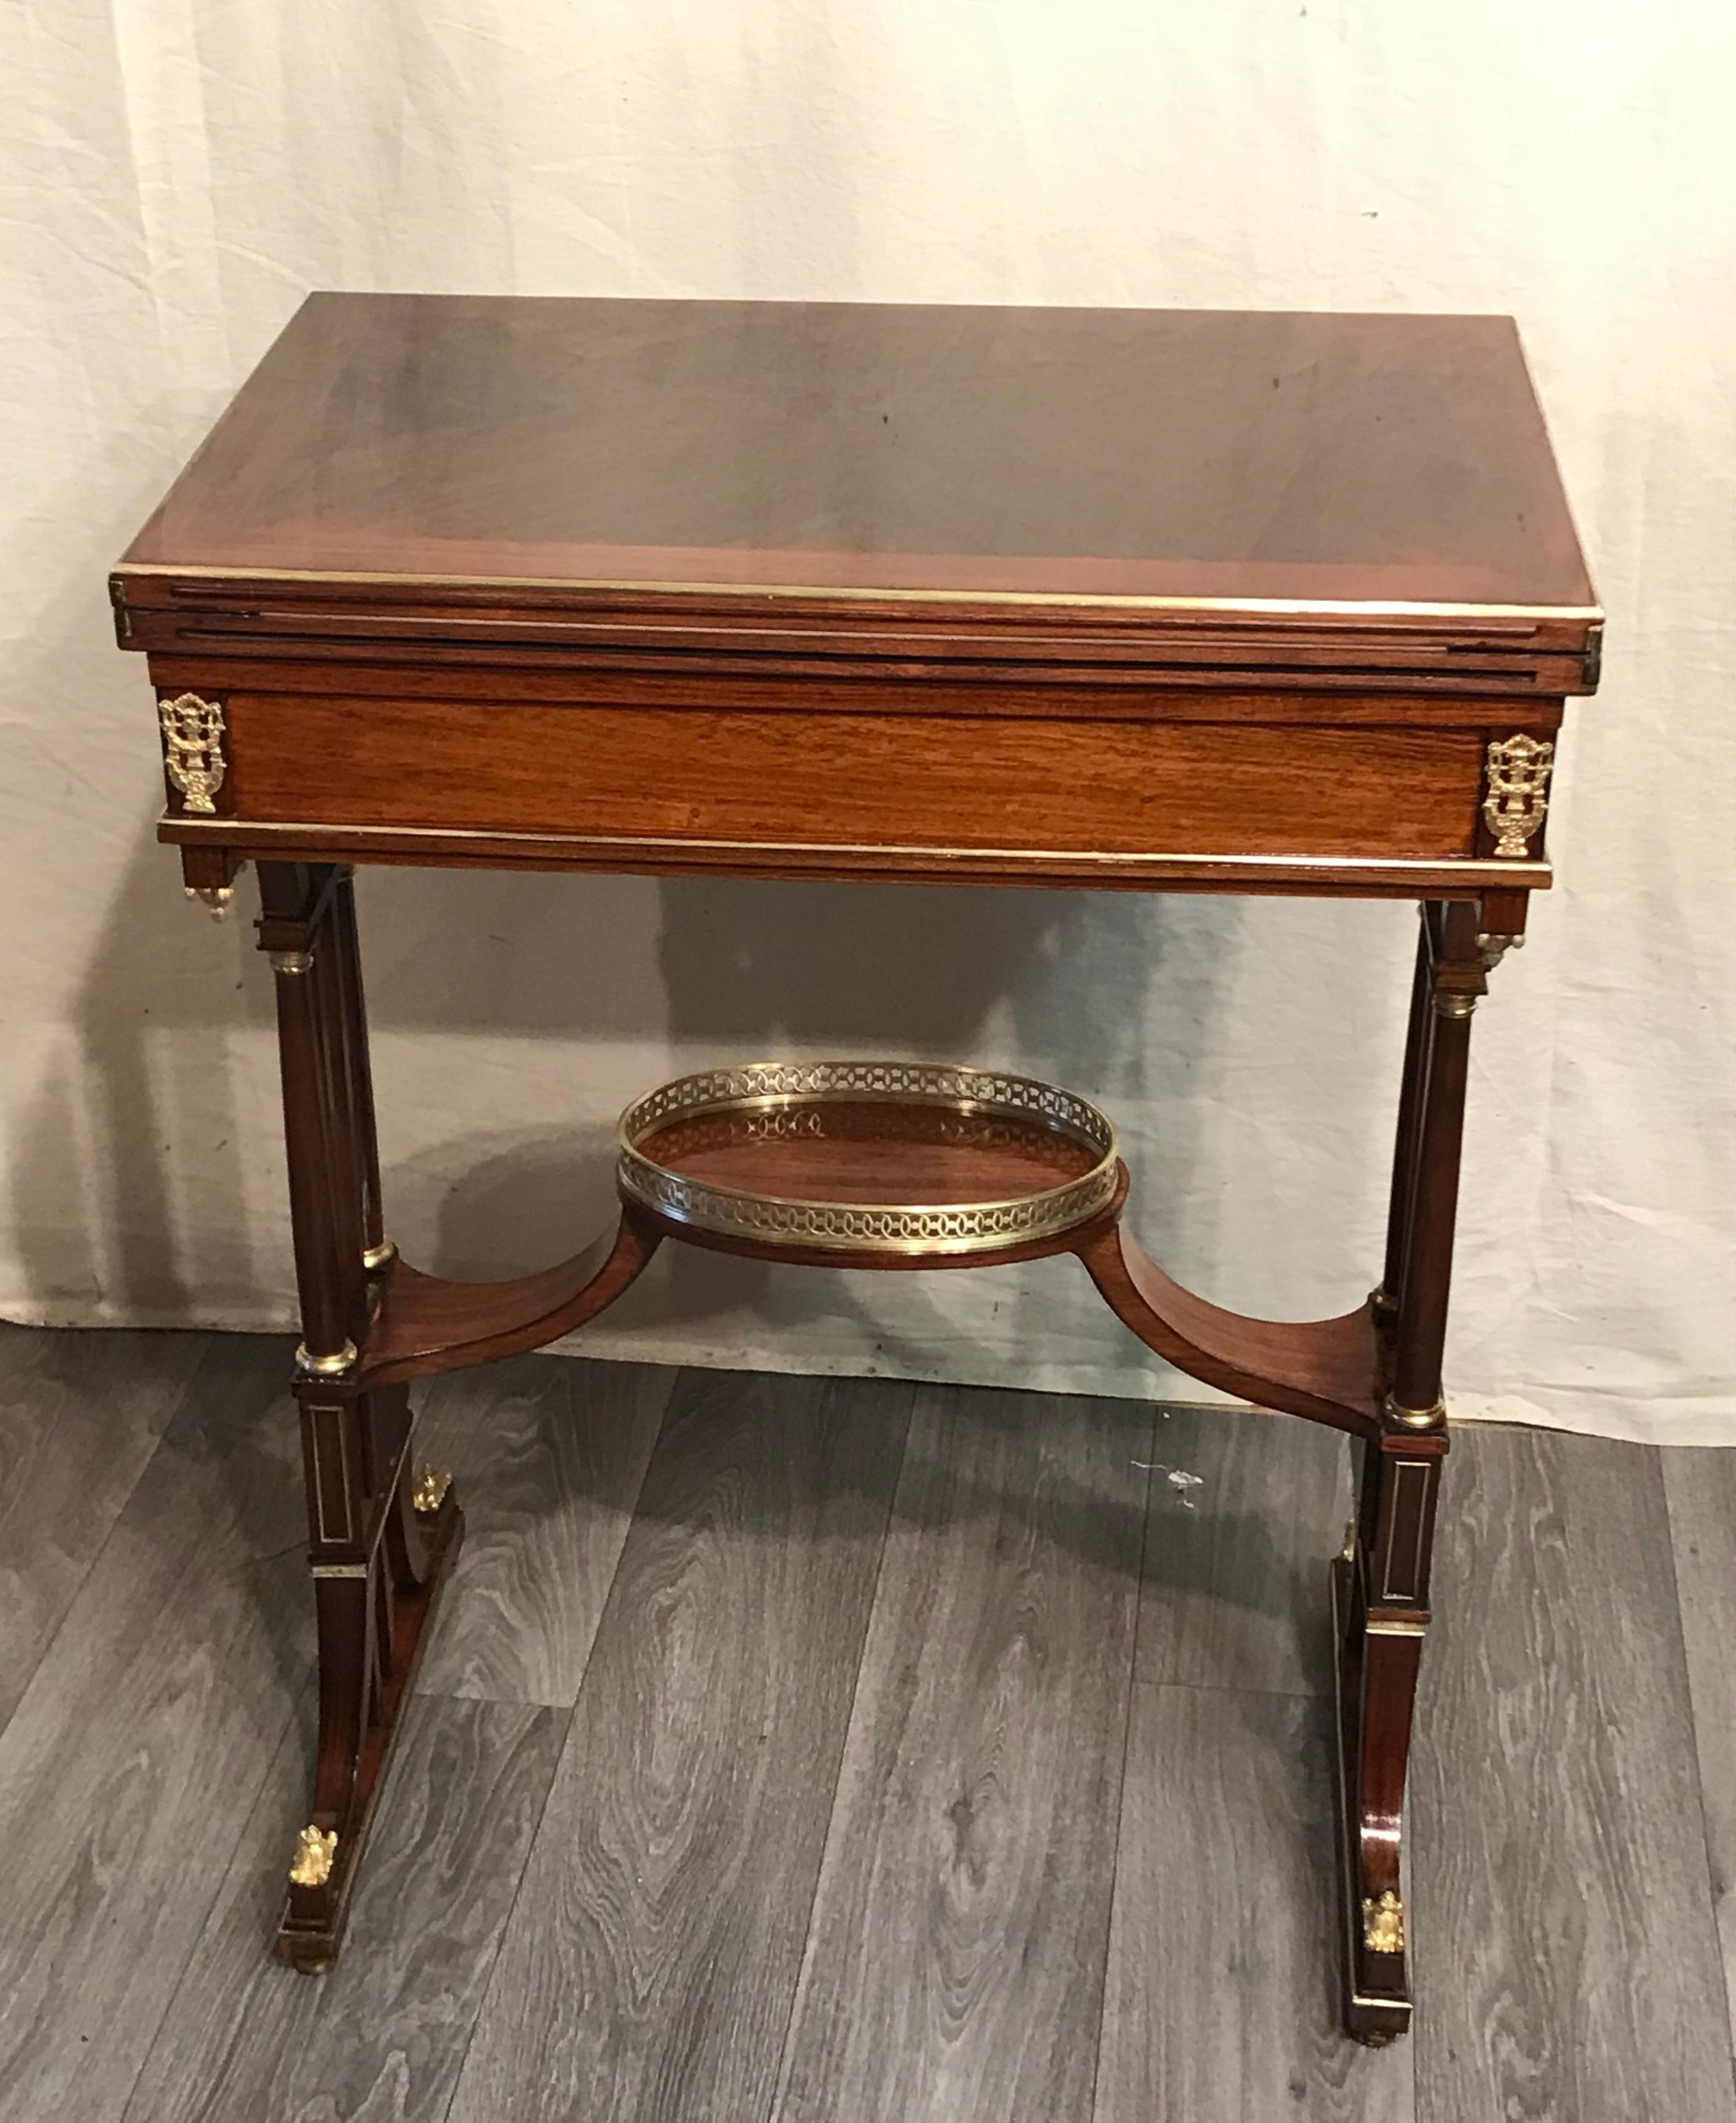 Mahogany Empire Style Card or Tea Table, Vienna 1880-1900 For Sale